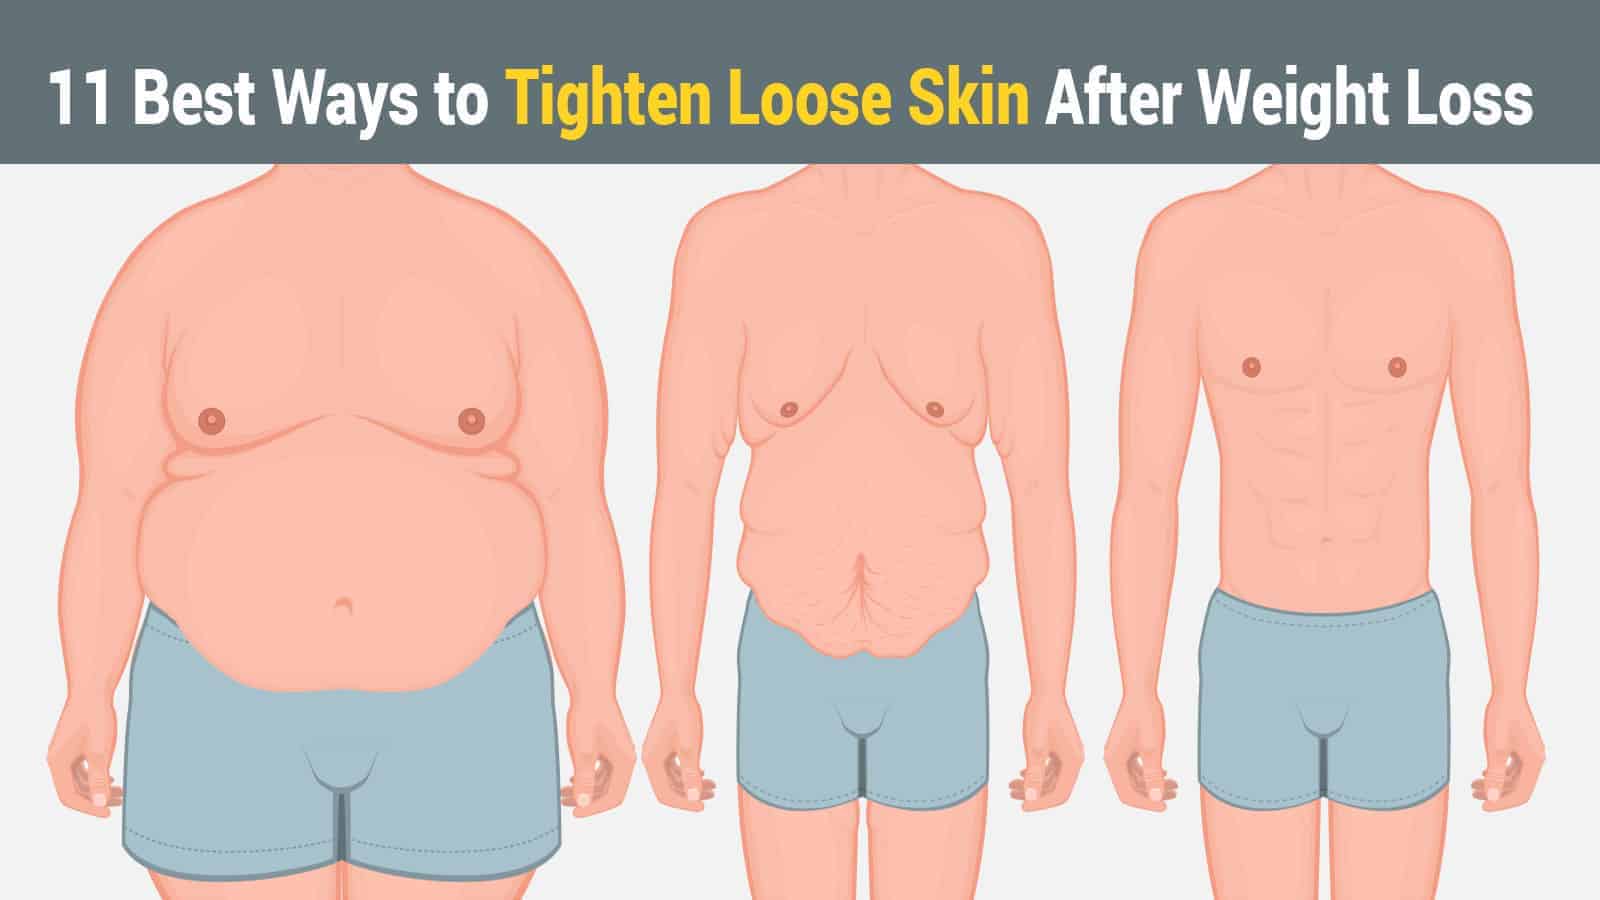 11 Best Ways to Tighten Loose Skin After Weight Loss